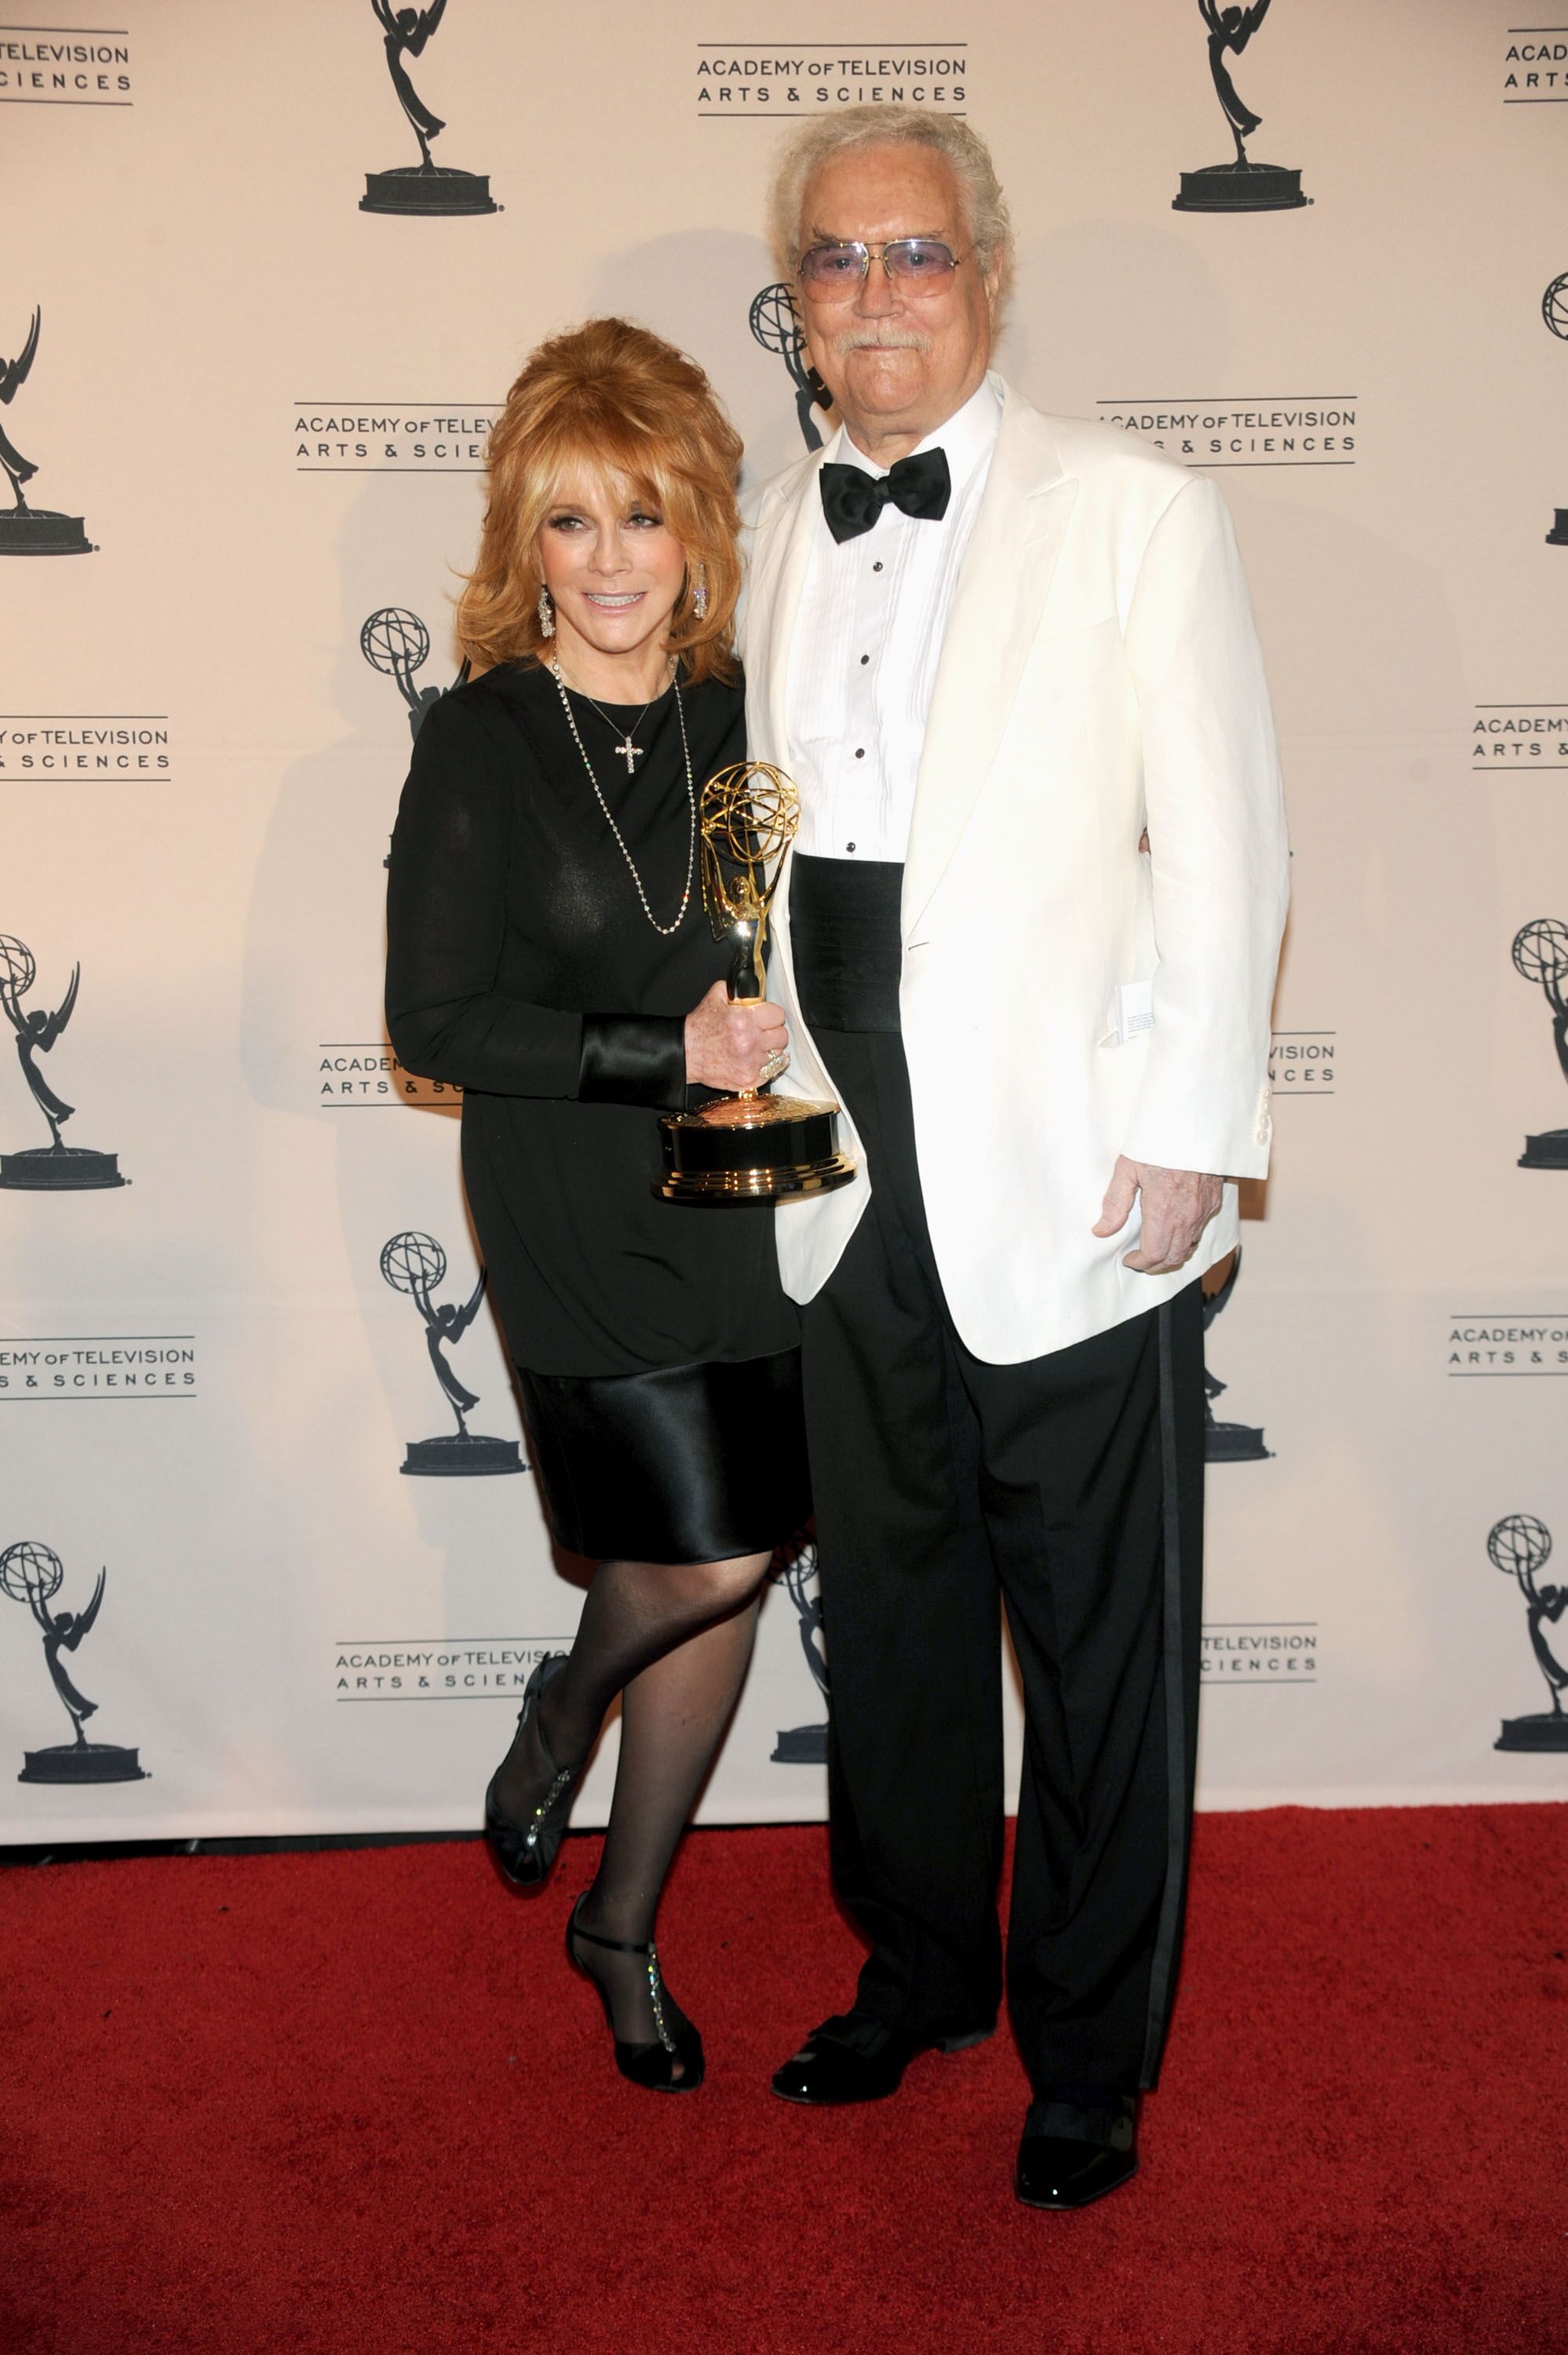 Roger Smith and Ann-Margret at the Nokia Theatre L.A. Live on August 21, 2010 in Los Angeles, California. | Photo: Getty Images